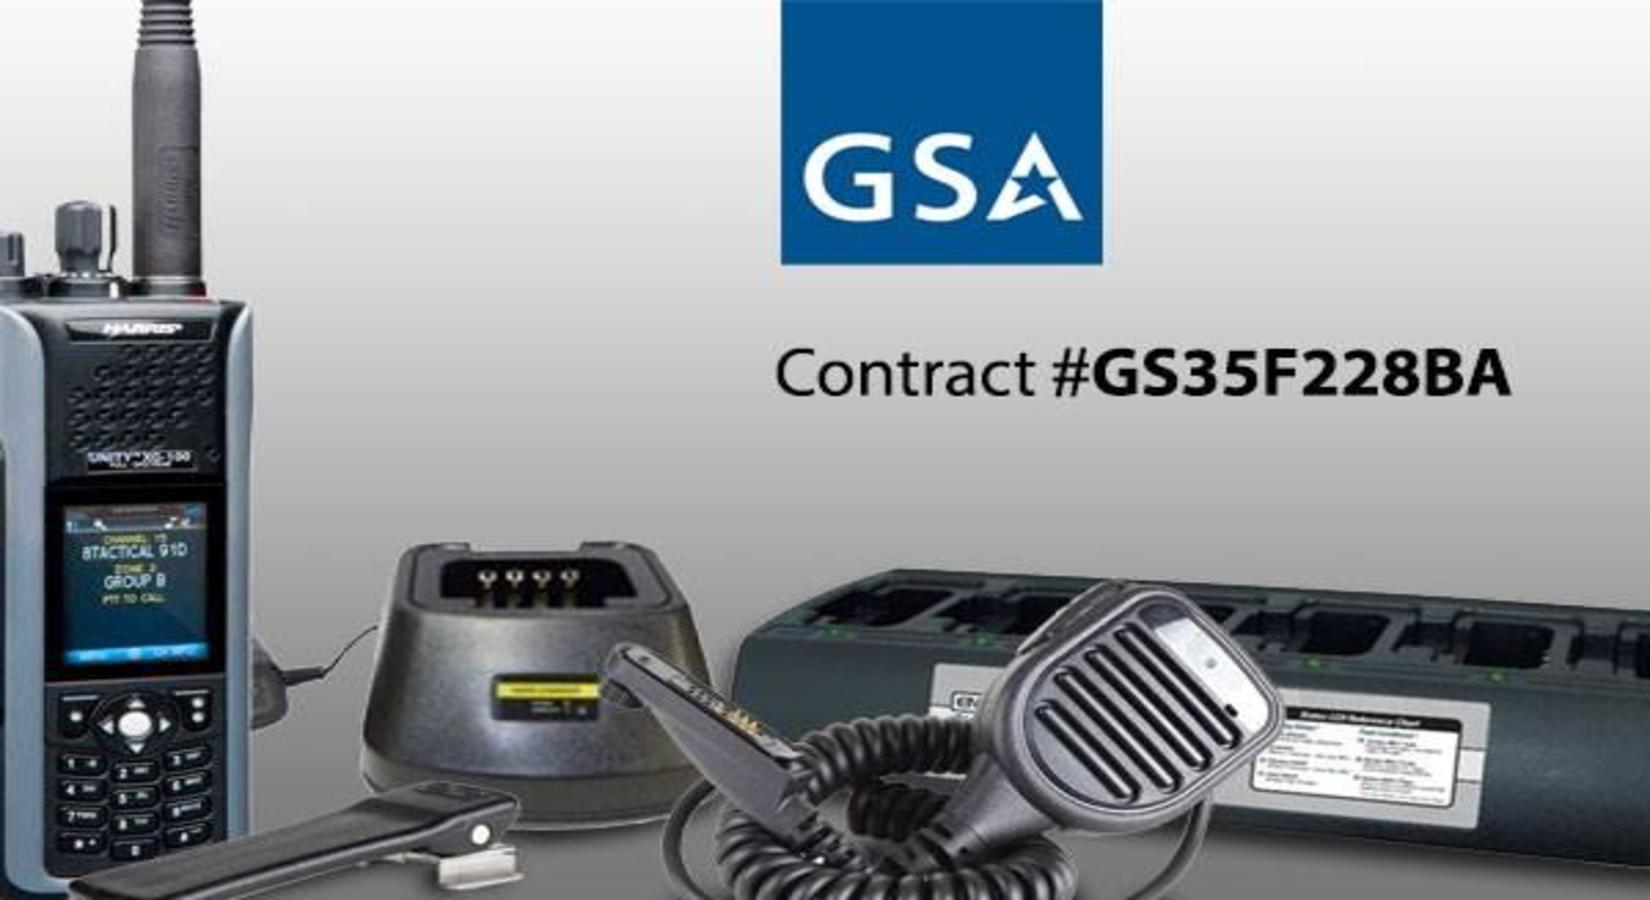 Choose from 1000+ GSA-Approved Communications Products